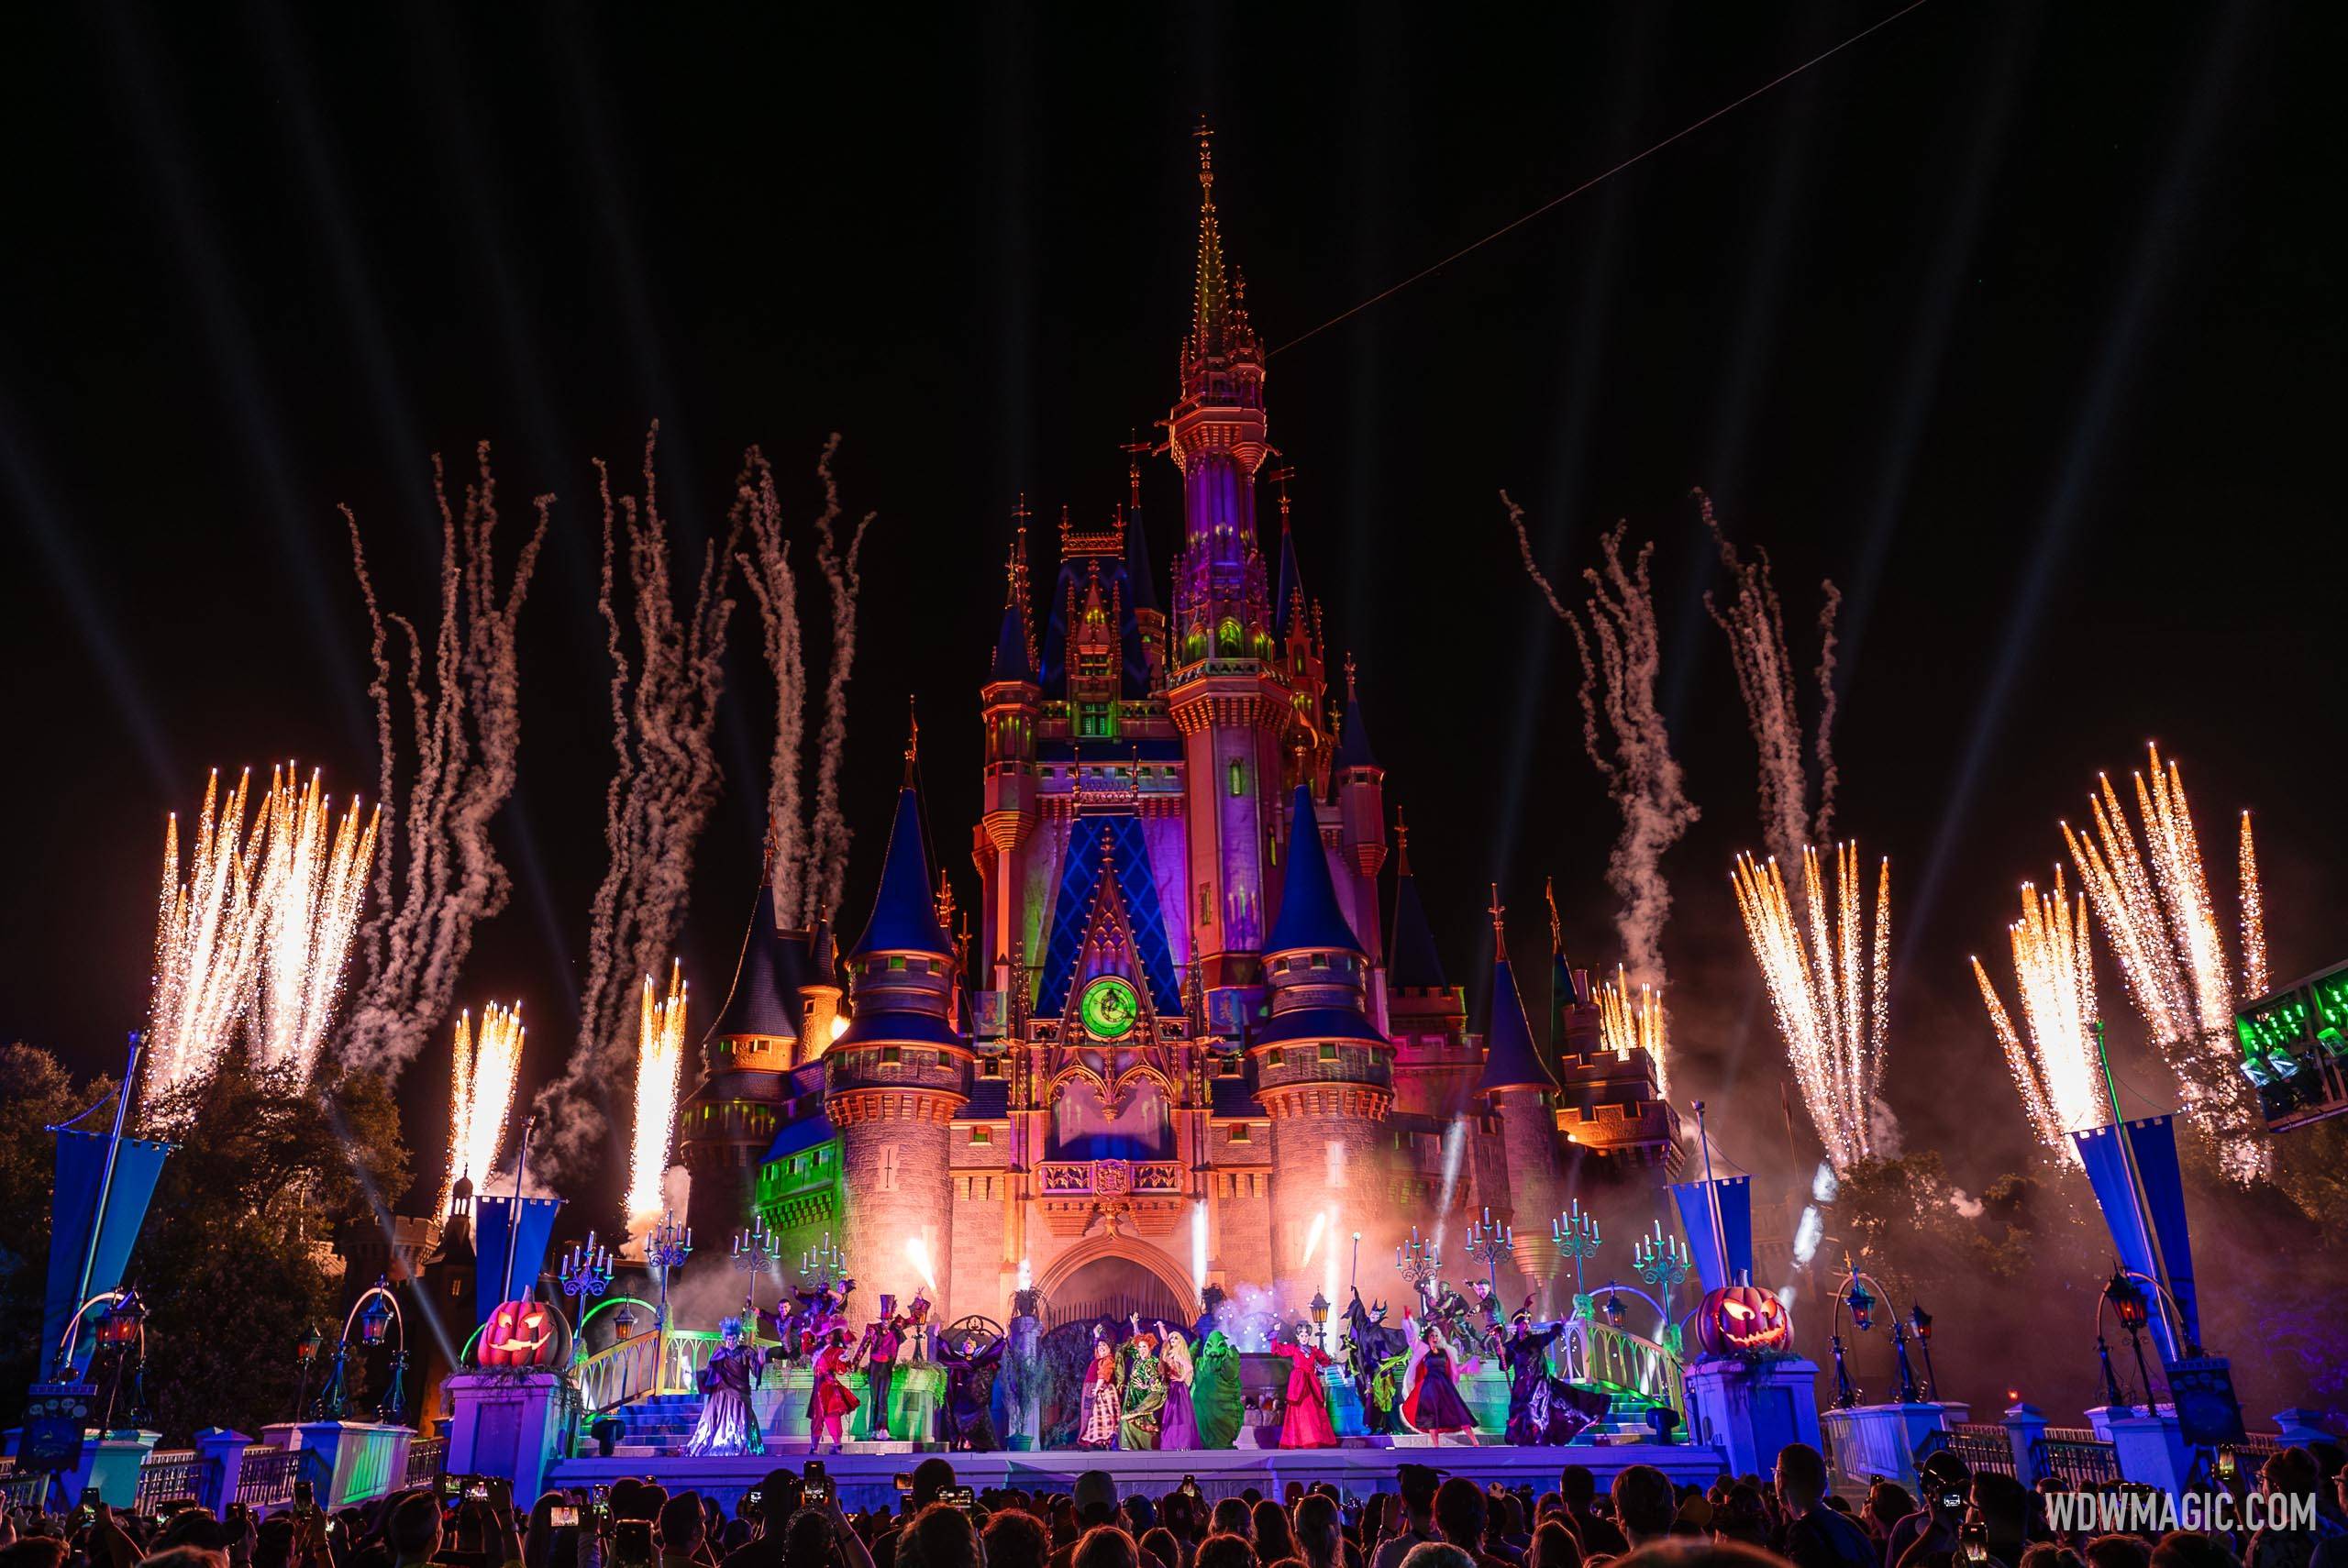 Only one date remains available for the 2023 Mickey's Not-So-Scary Halloween Party at Walt Disney World